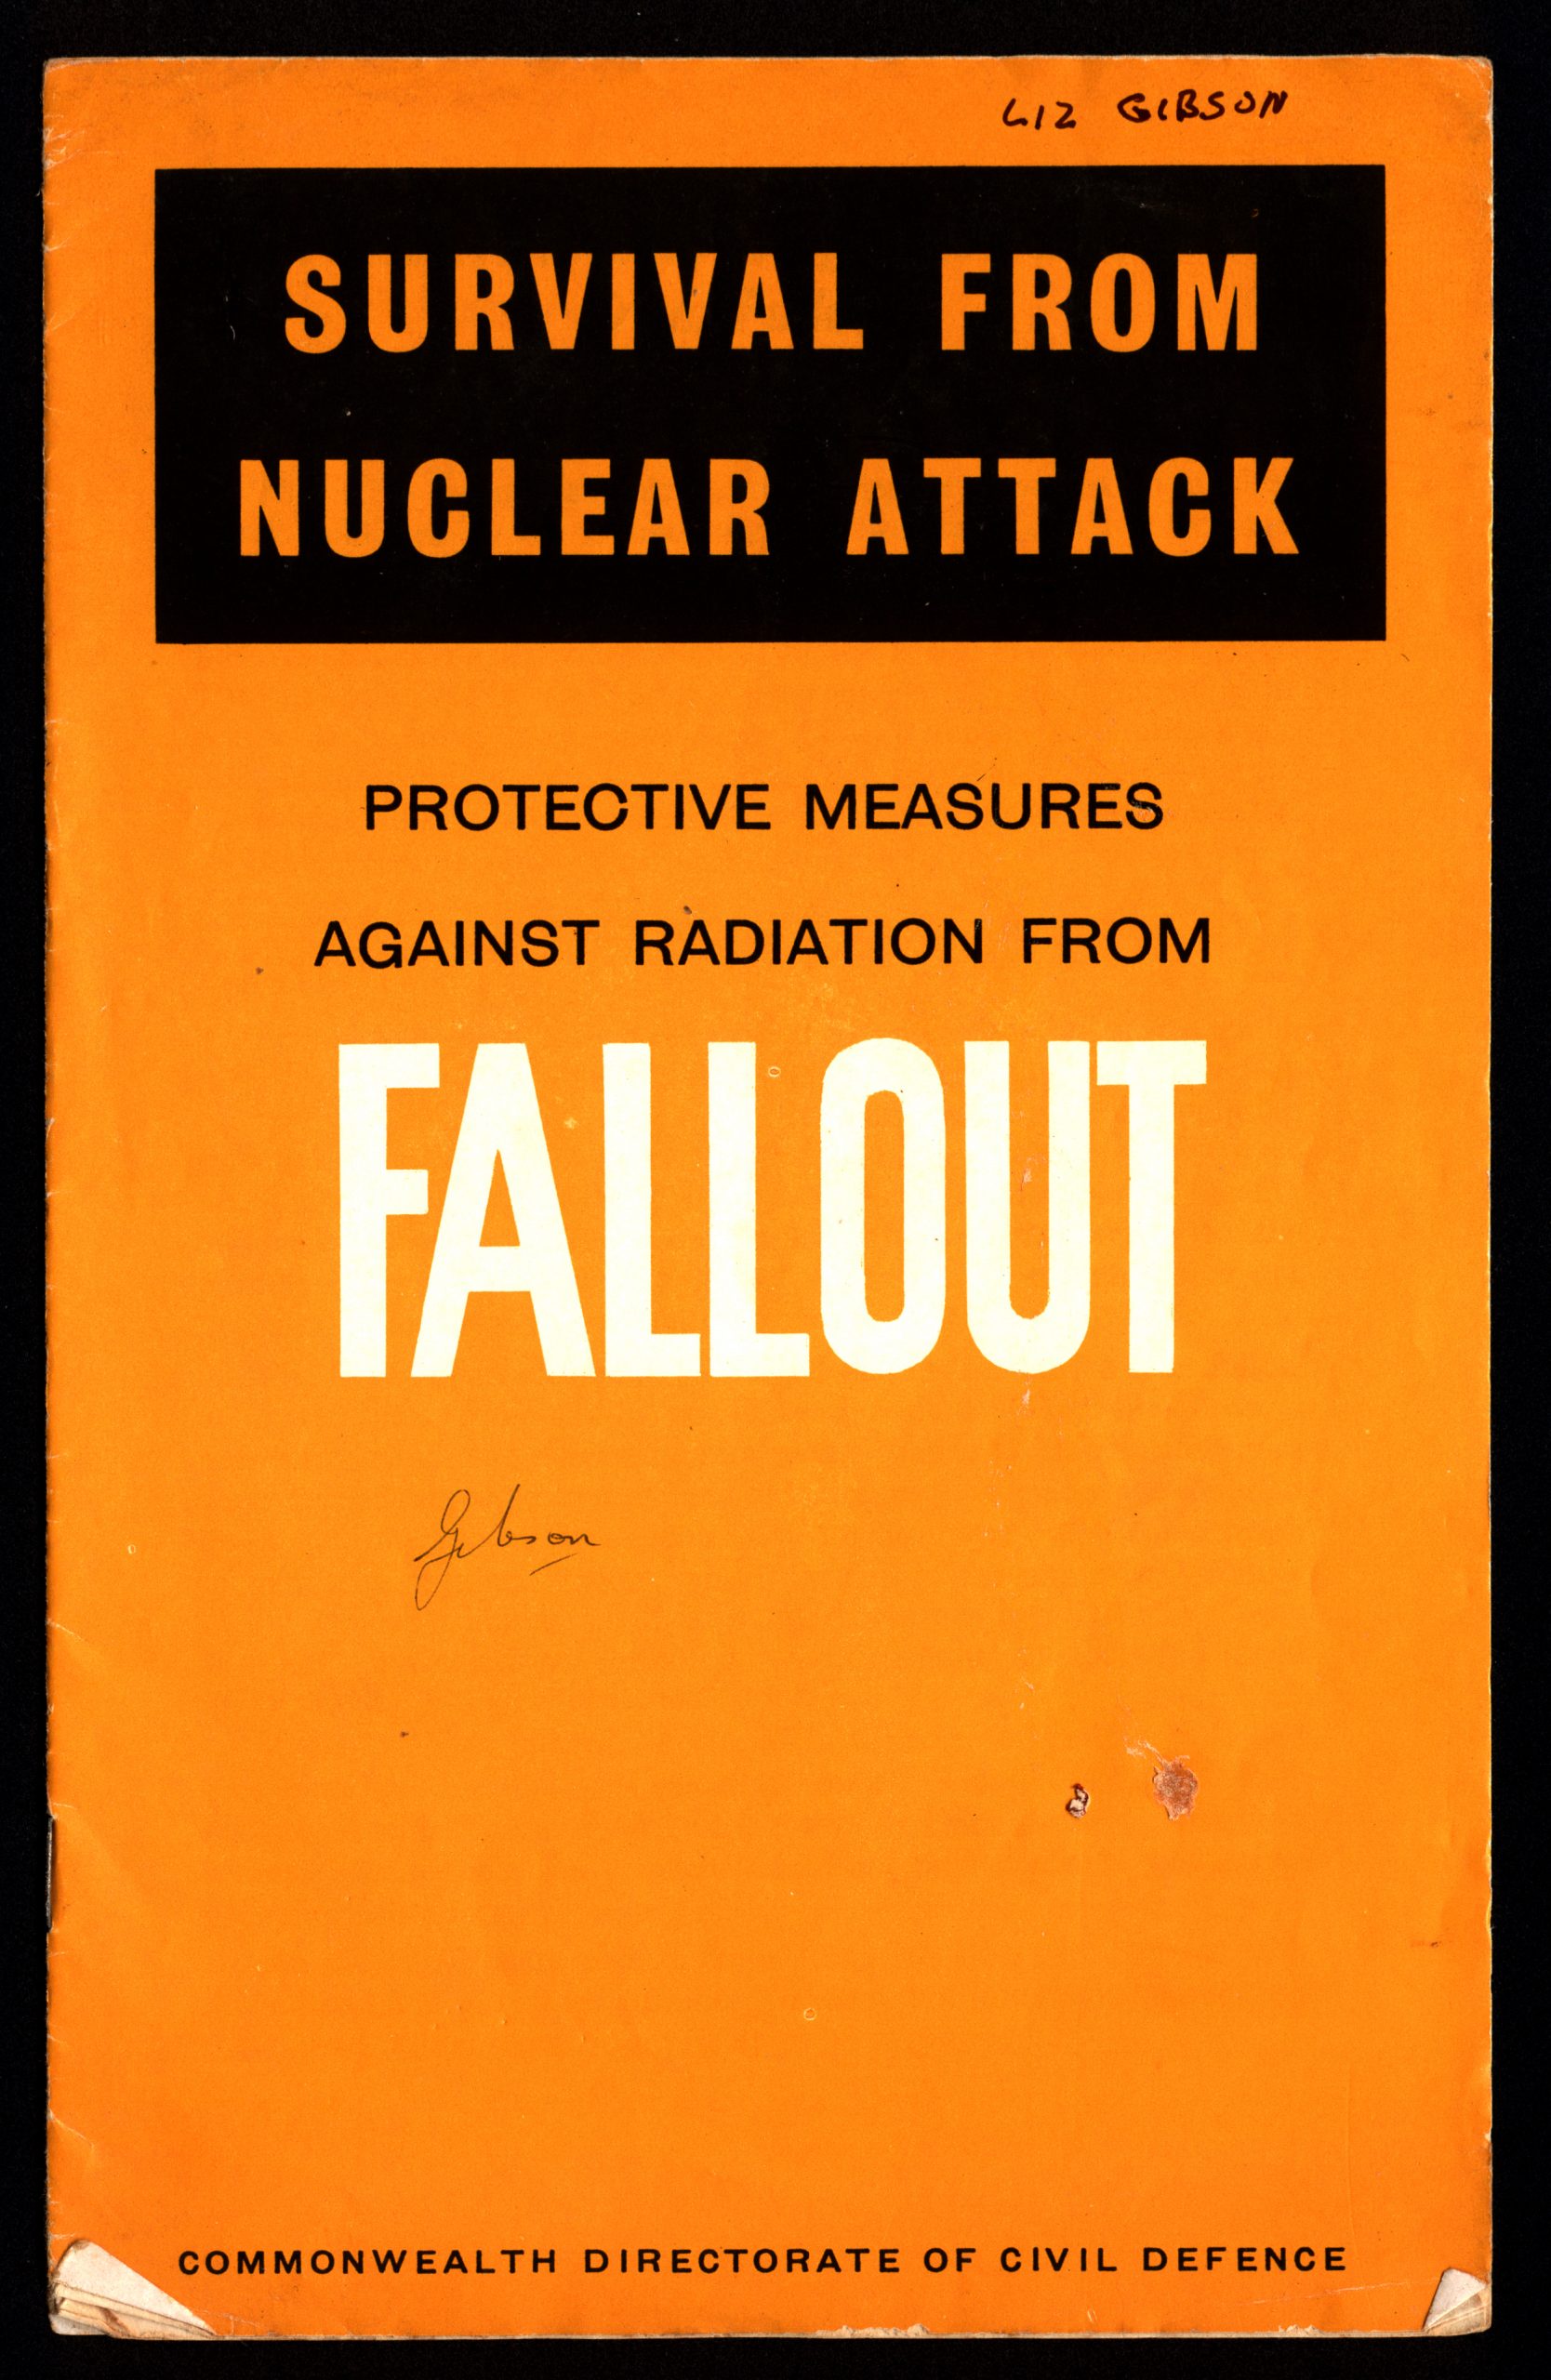 Survival From Nuclear Attack - Protective Measures pamphlet - front cover